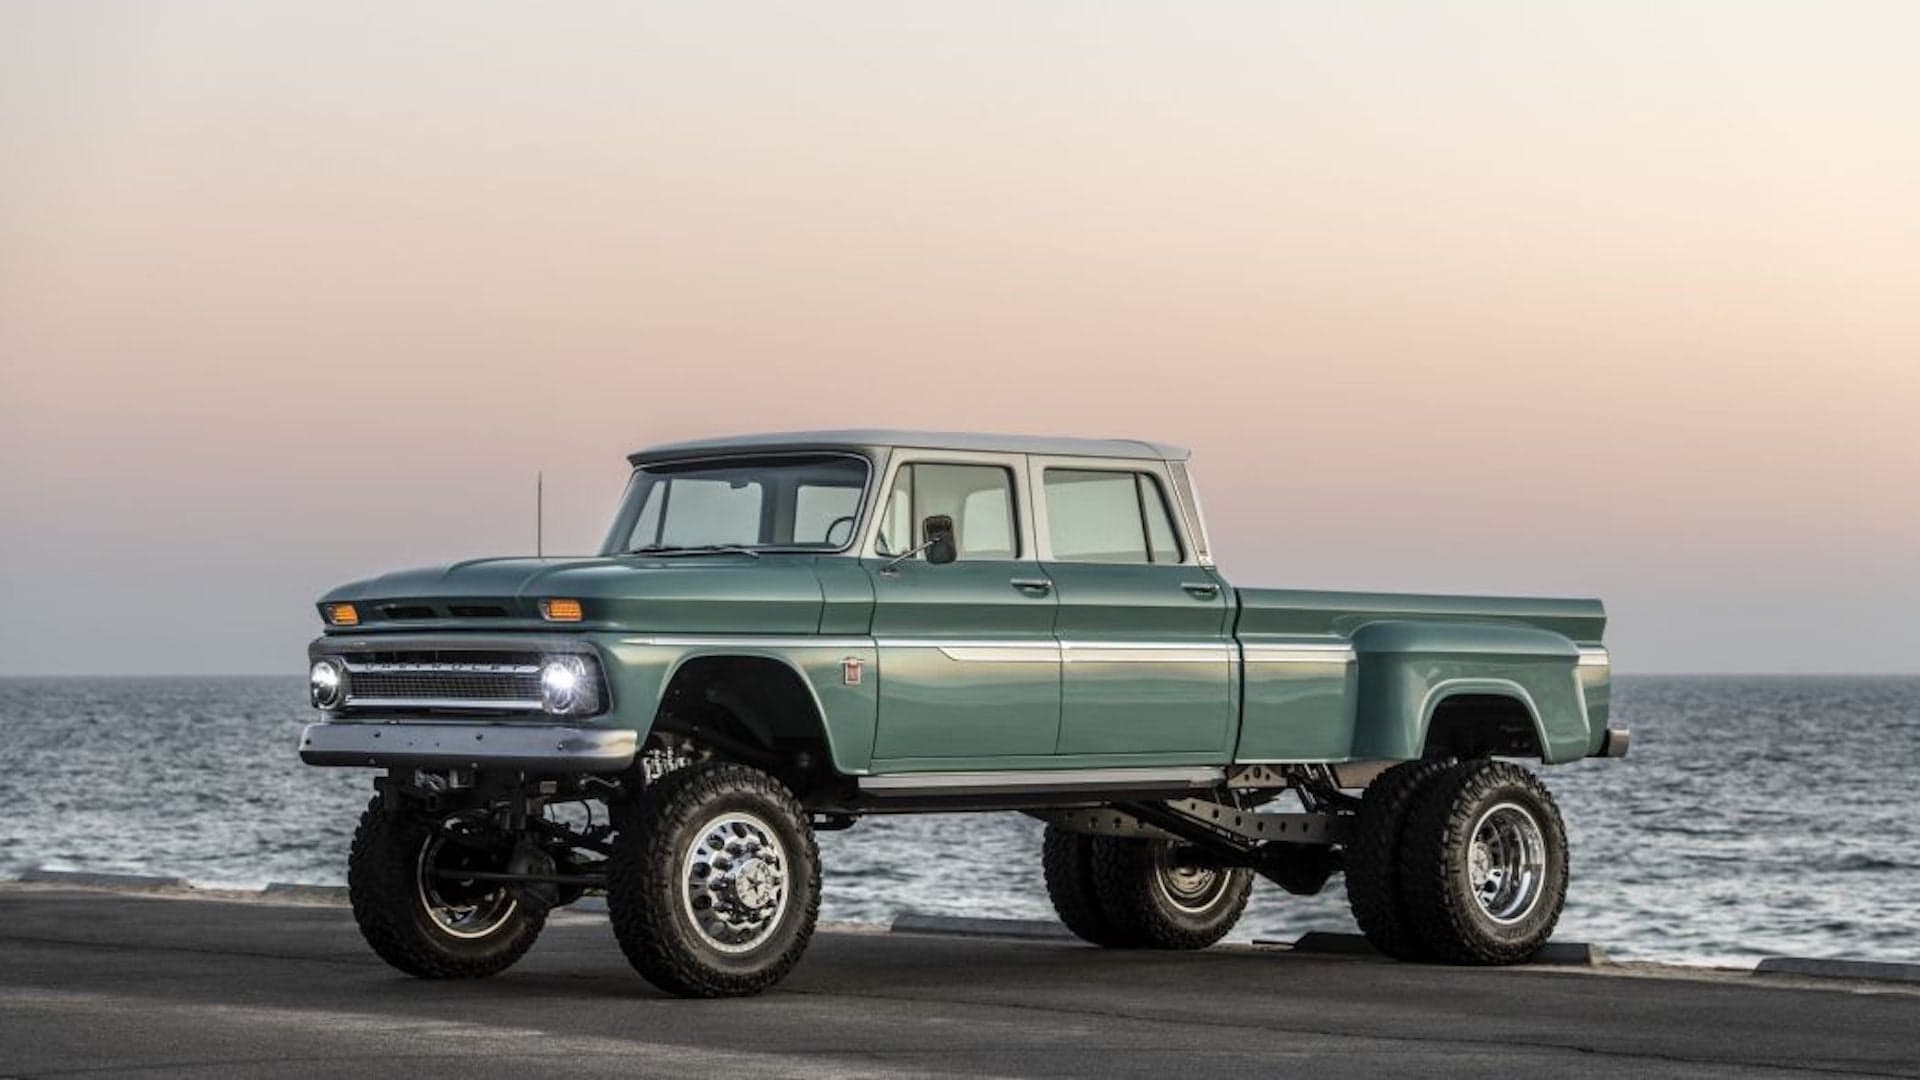 1966 Chevrolet ‘Ponderosa’ Is a $150,000 Pickup Truck With Big Rig Power